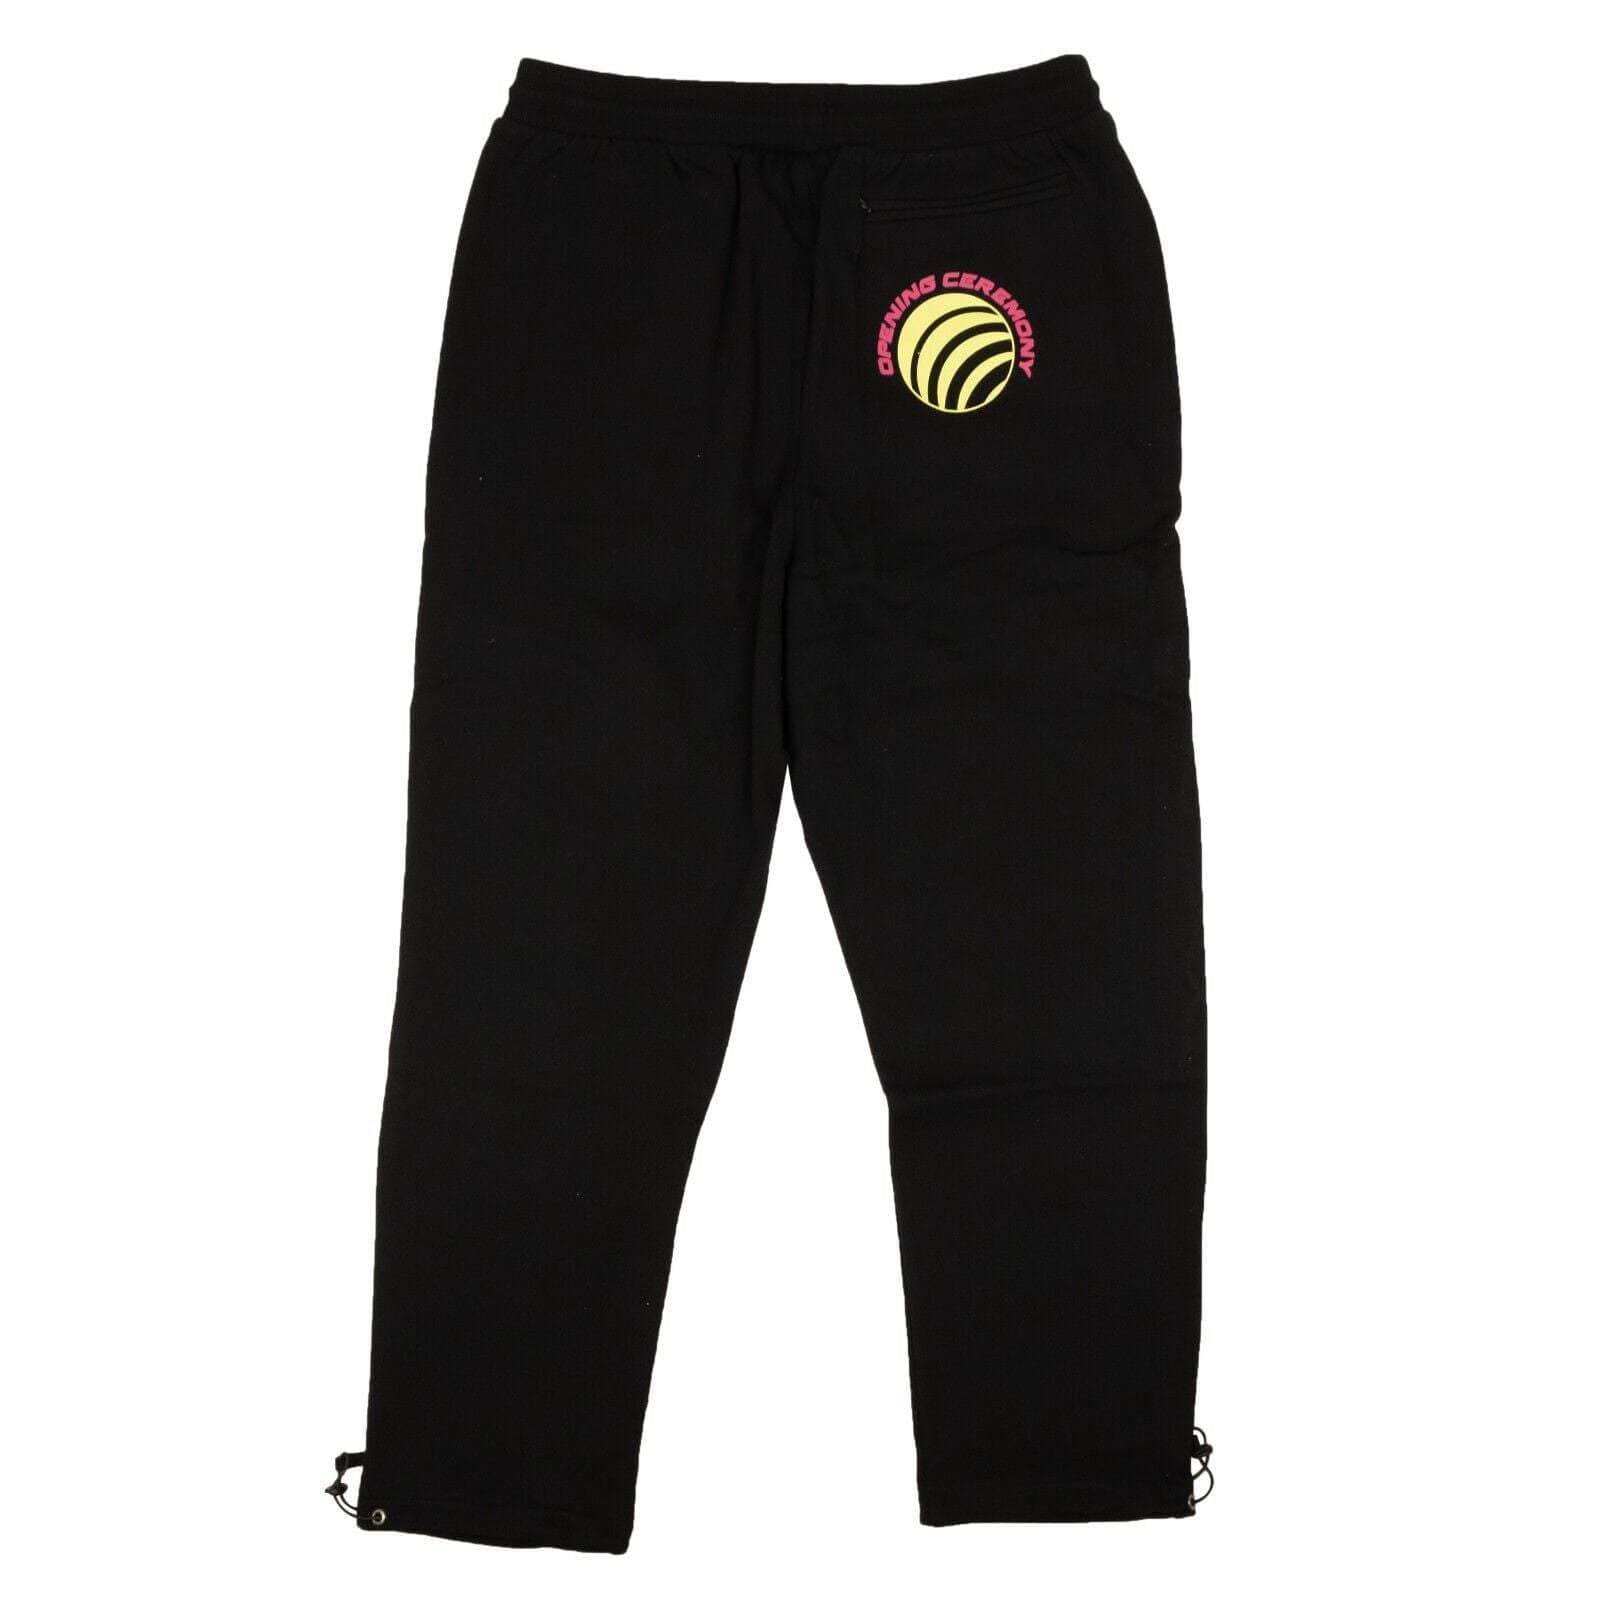 Opening Ceremony channelenable-all, chicmi, couponcollection, gender-mens, gender-womens, main-clothing S Black Cotton Logo Relax Fit Sweatpants 95-OCY-1064/S 95-OCY-1064/S